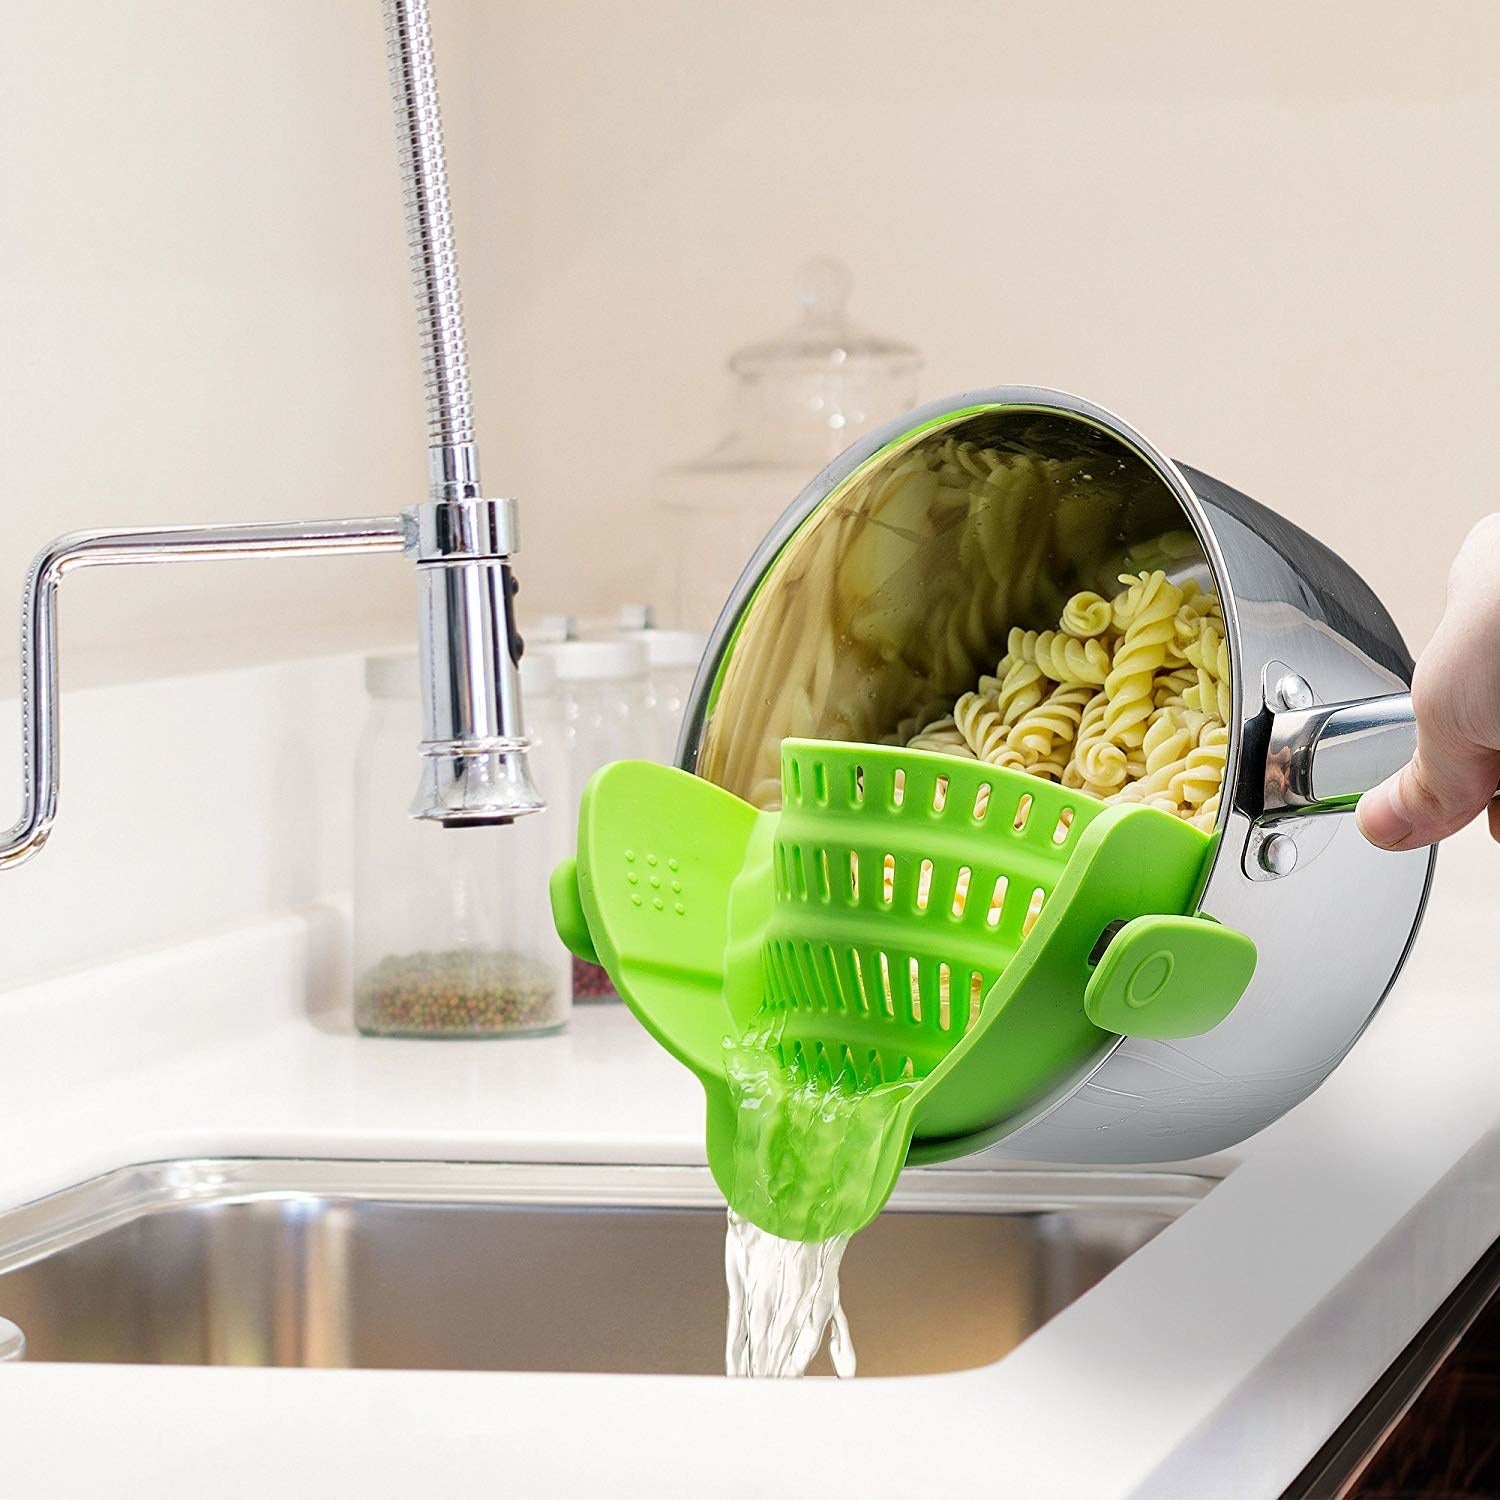 the green silicone strainer clipped to a pot with rotini pasta in it 